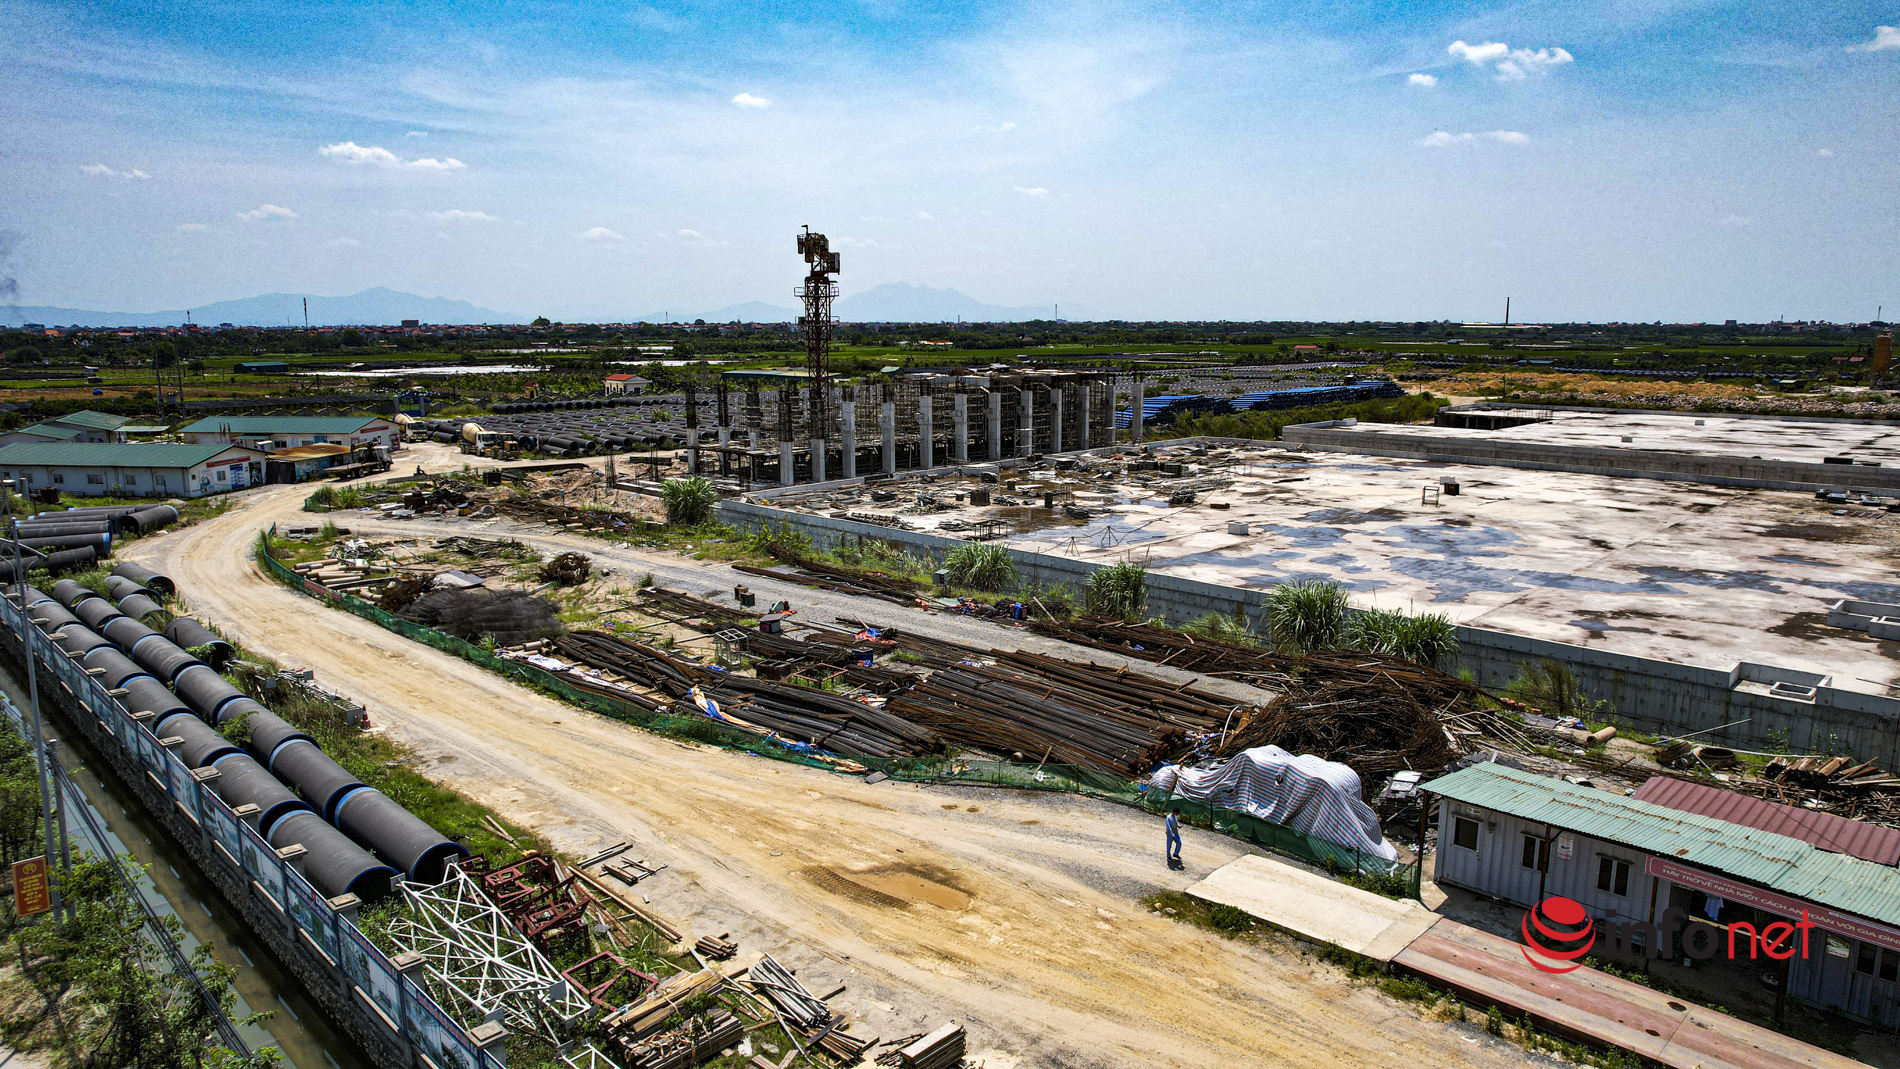 Hanoi: The 3,700 billion water plant is 4 years behind schedule, the construction site is sprawling and empty of workers